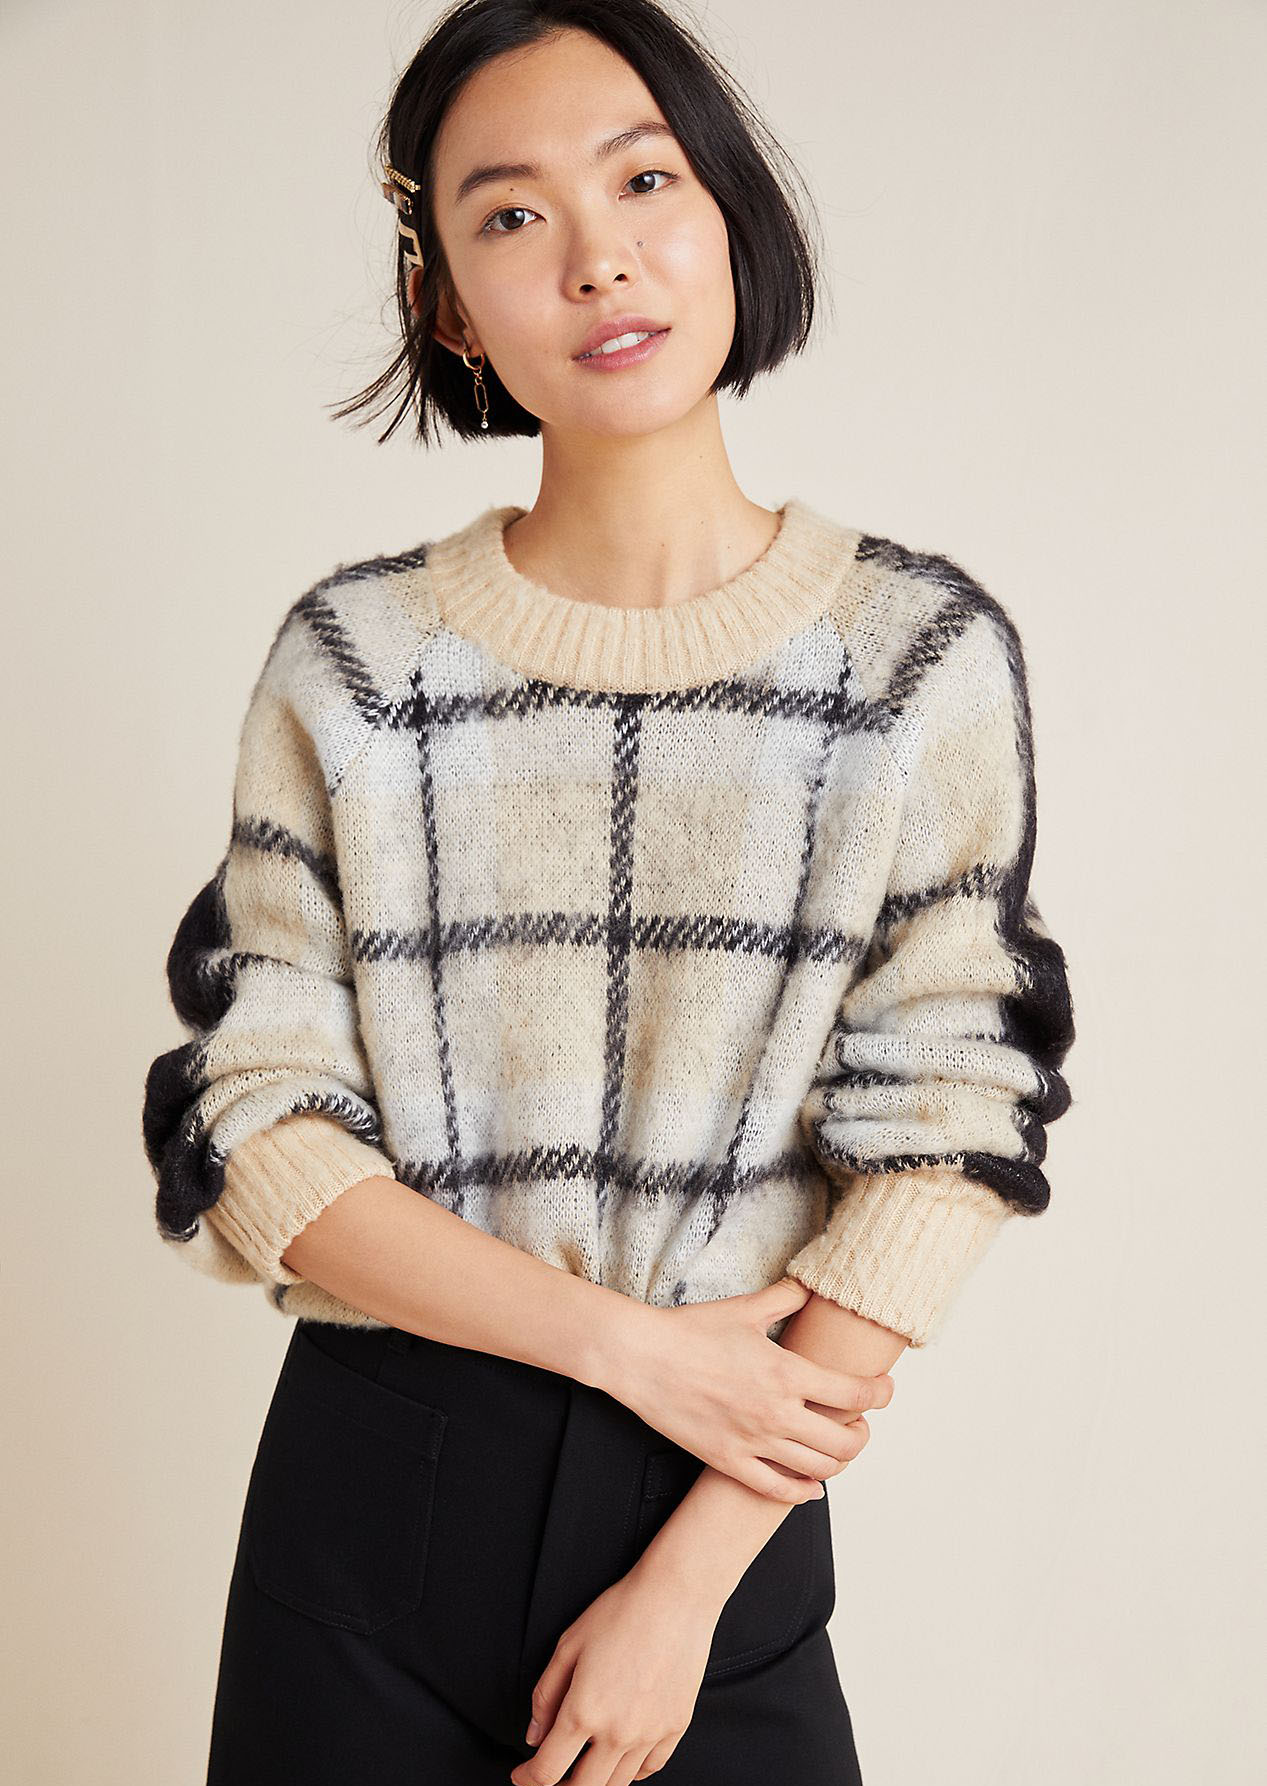 Anthropologie sweater